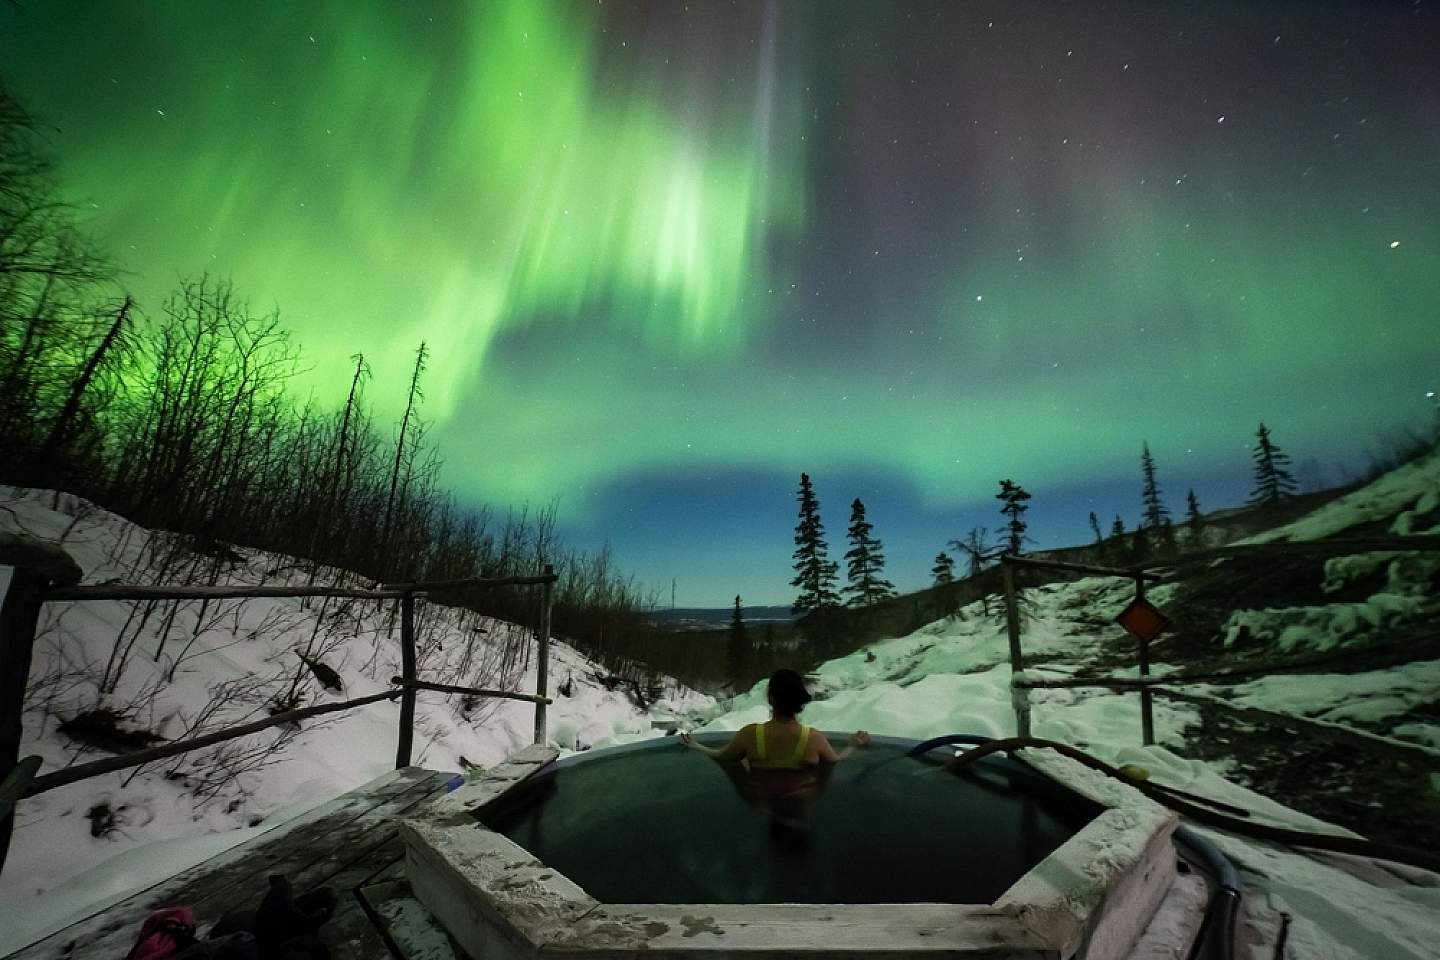 Soak in the hot springs of Fairbanks beneath the northern lights